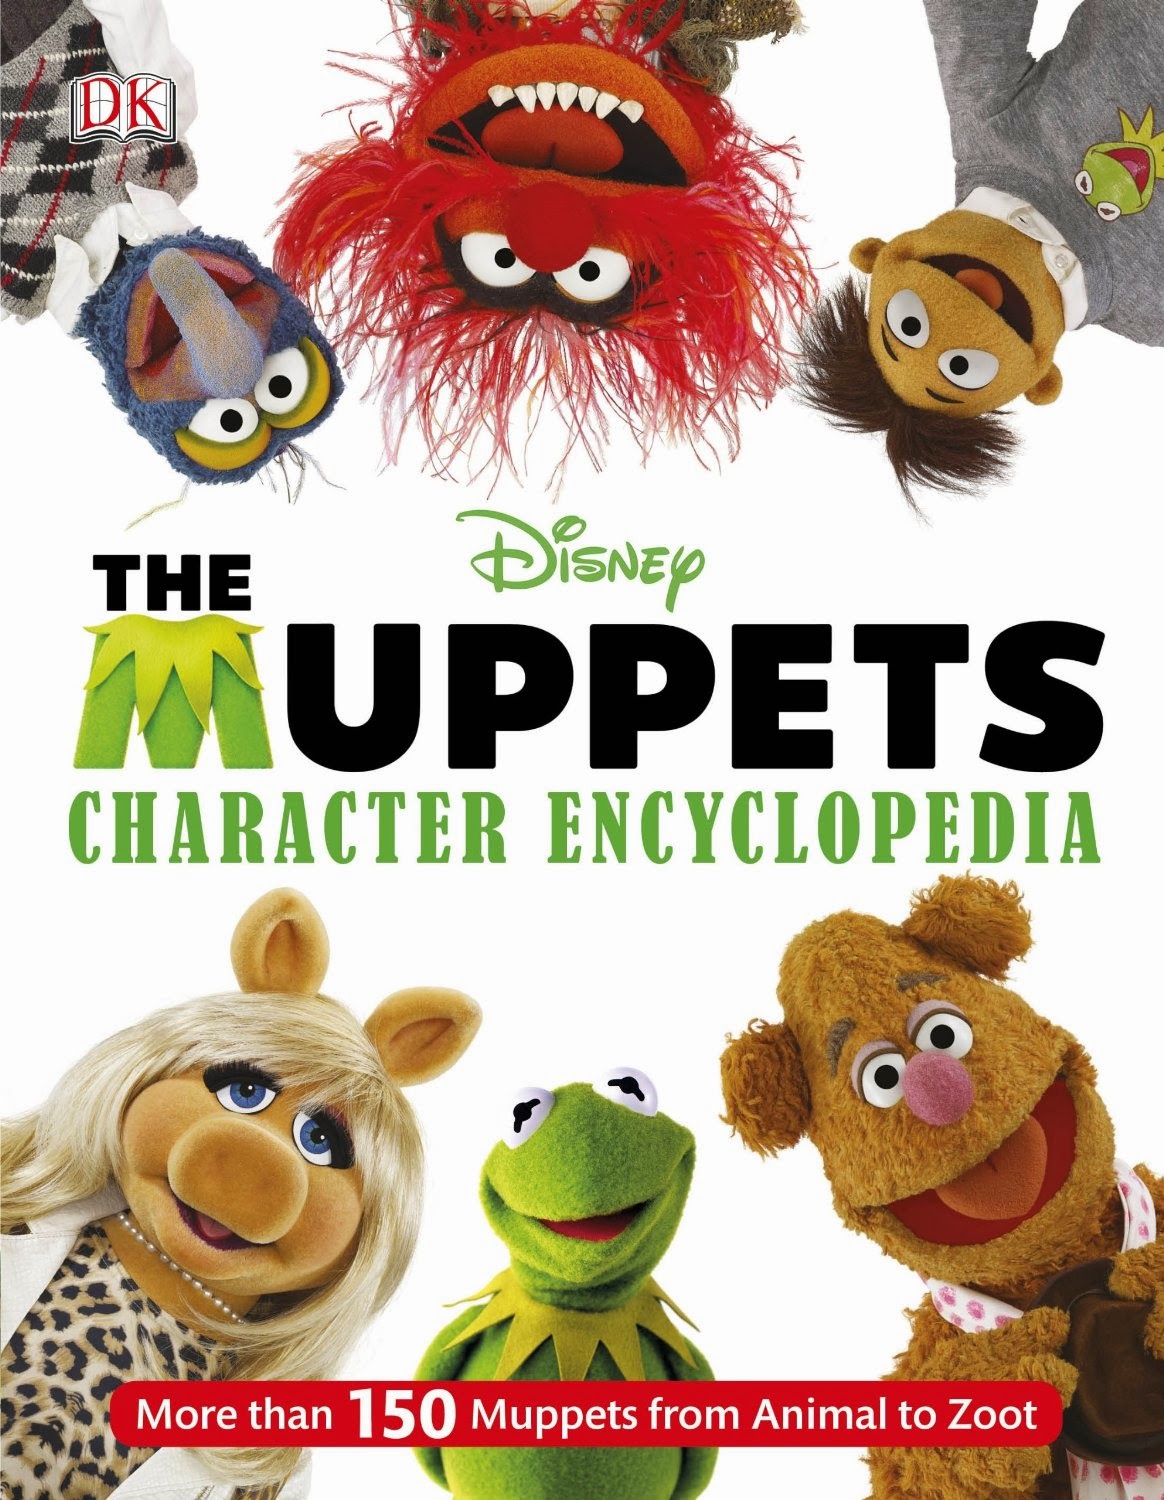 Book Review: The Muppets Character Encyclopedia